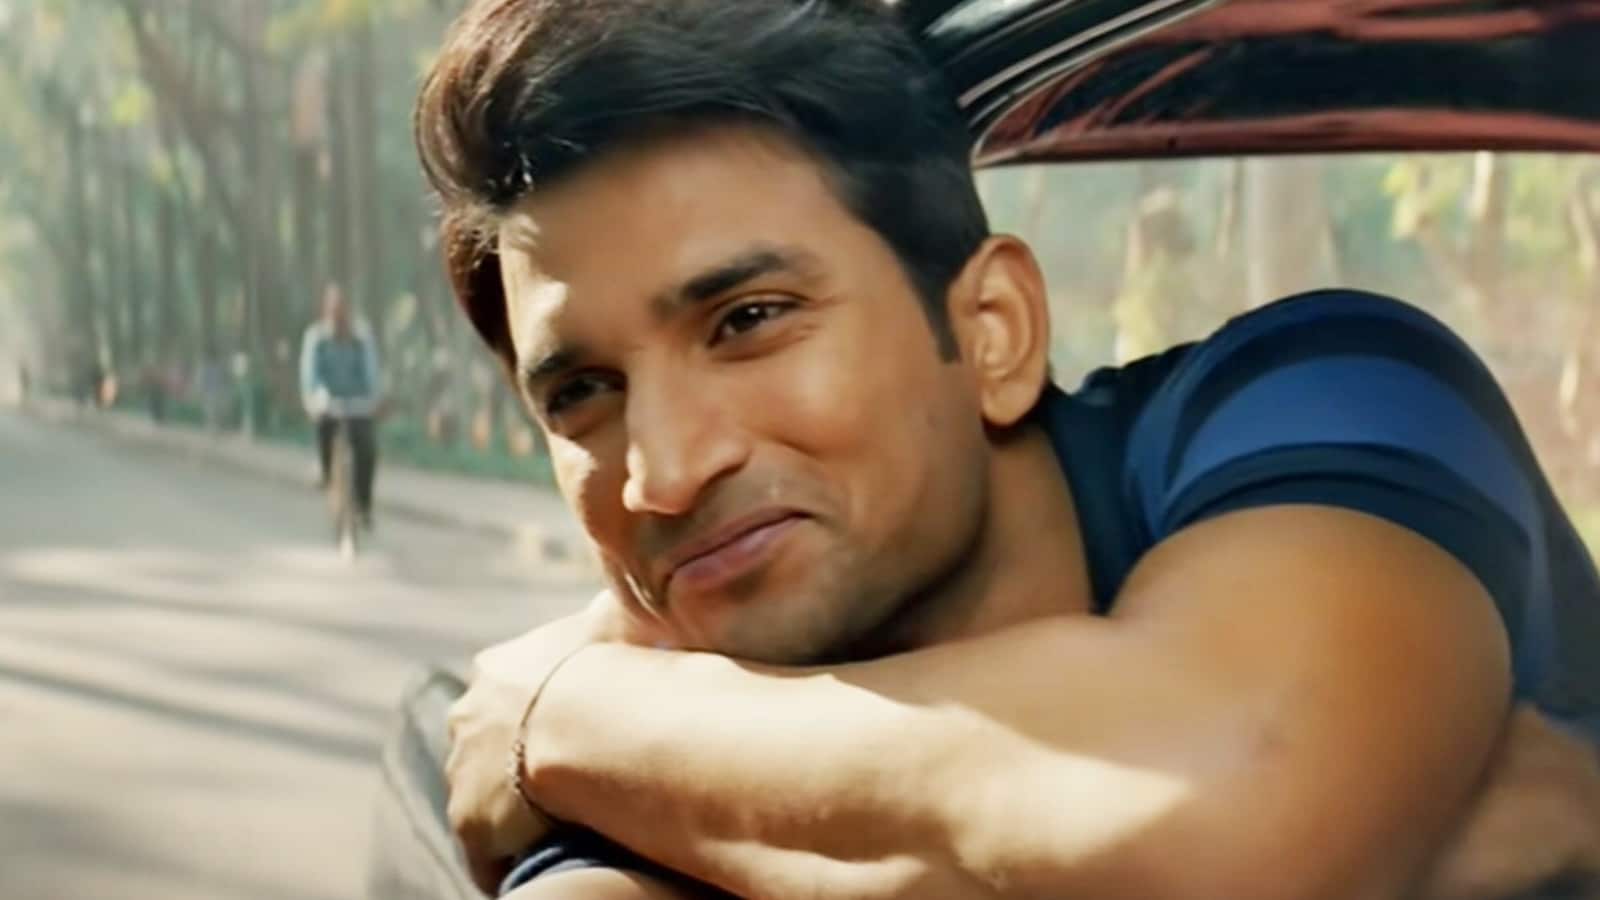 An Incredible Compilation of Sushant Singh Rajput Images in Full 4K – Over 999 to Choose From!